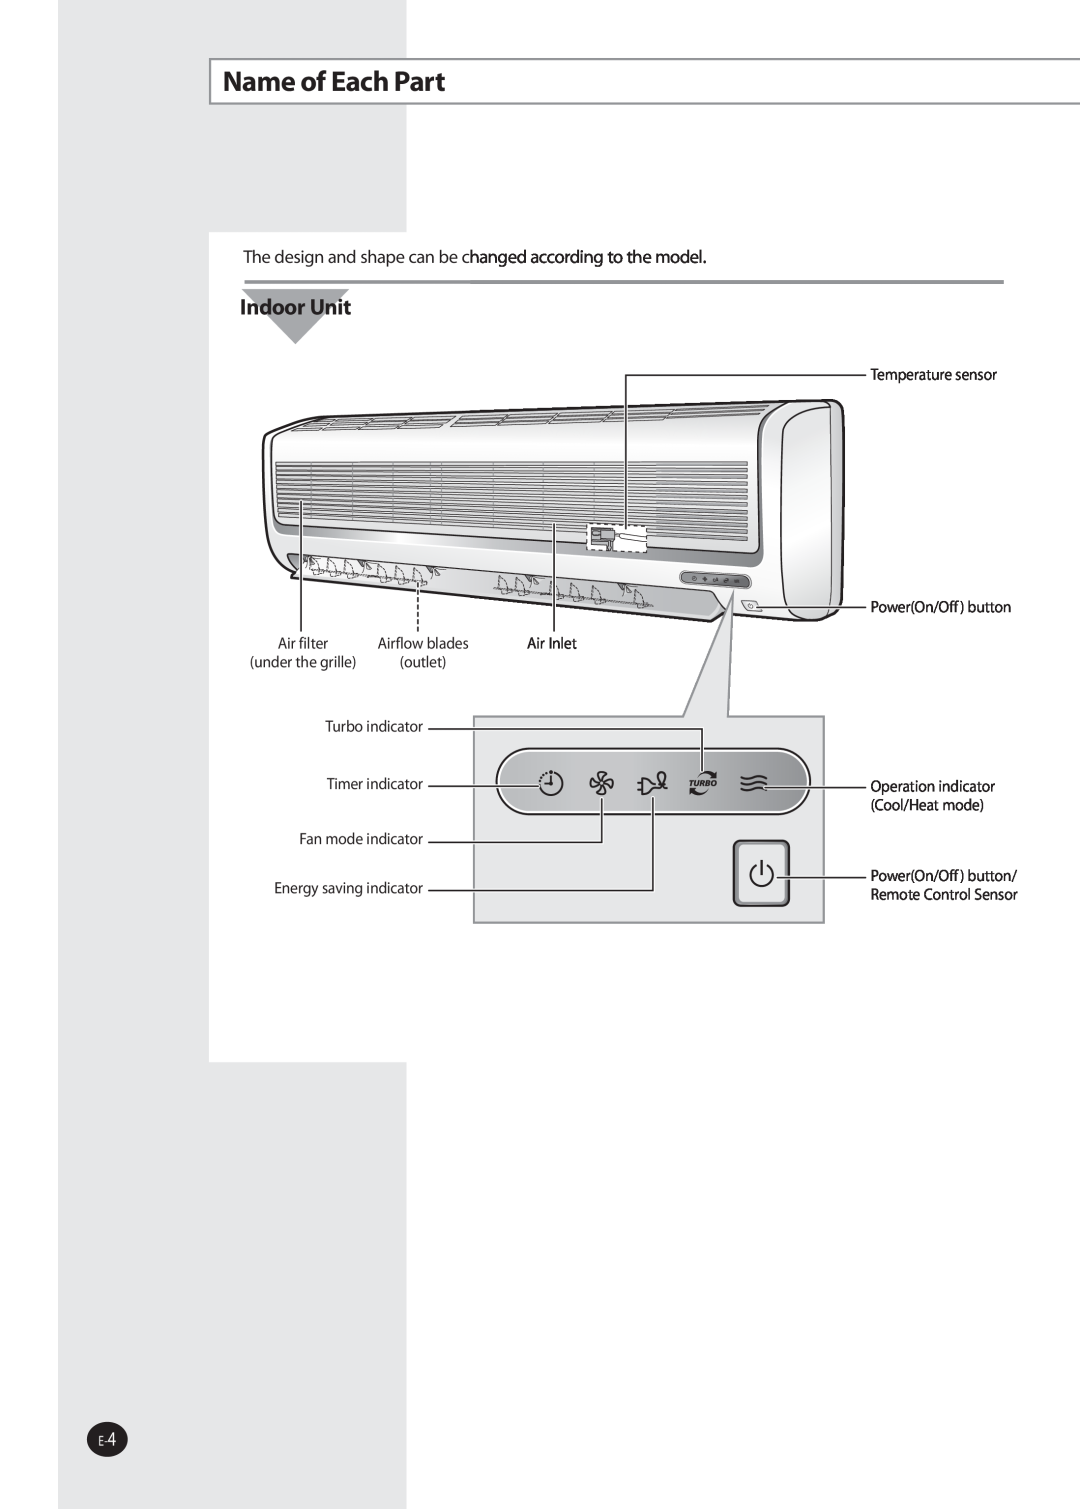 Samsung AQV36W user manual Name of Each Part, Indoor Unit 